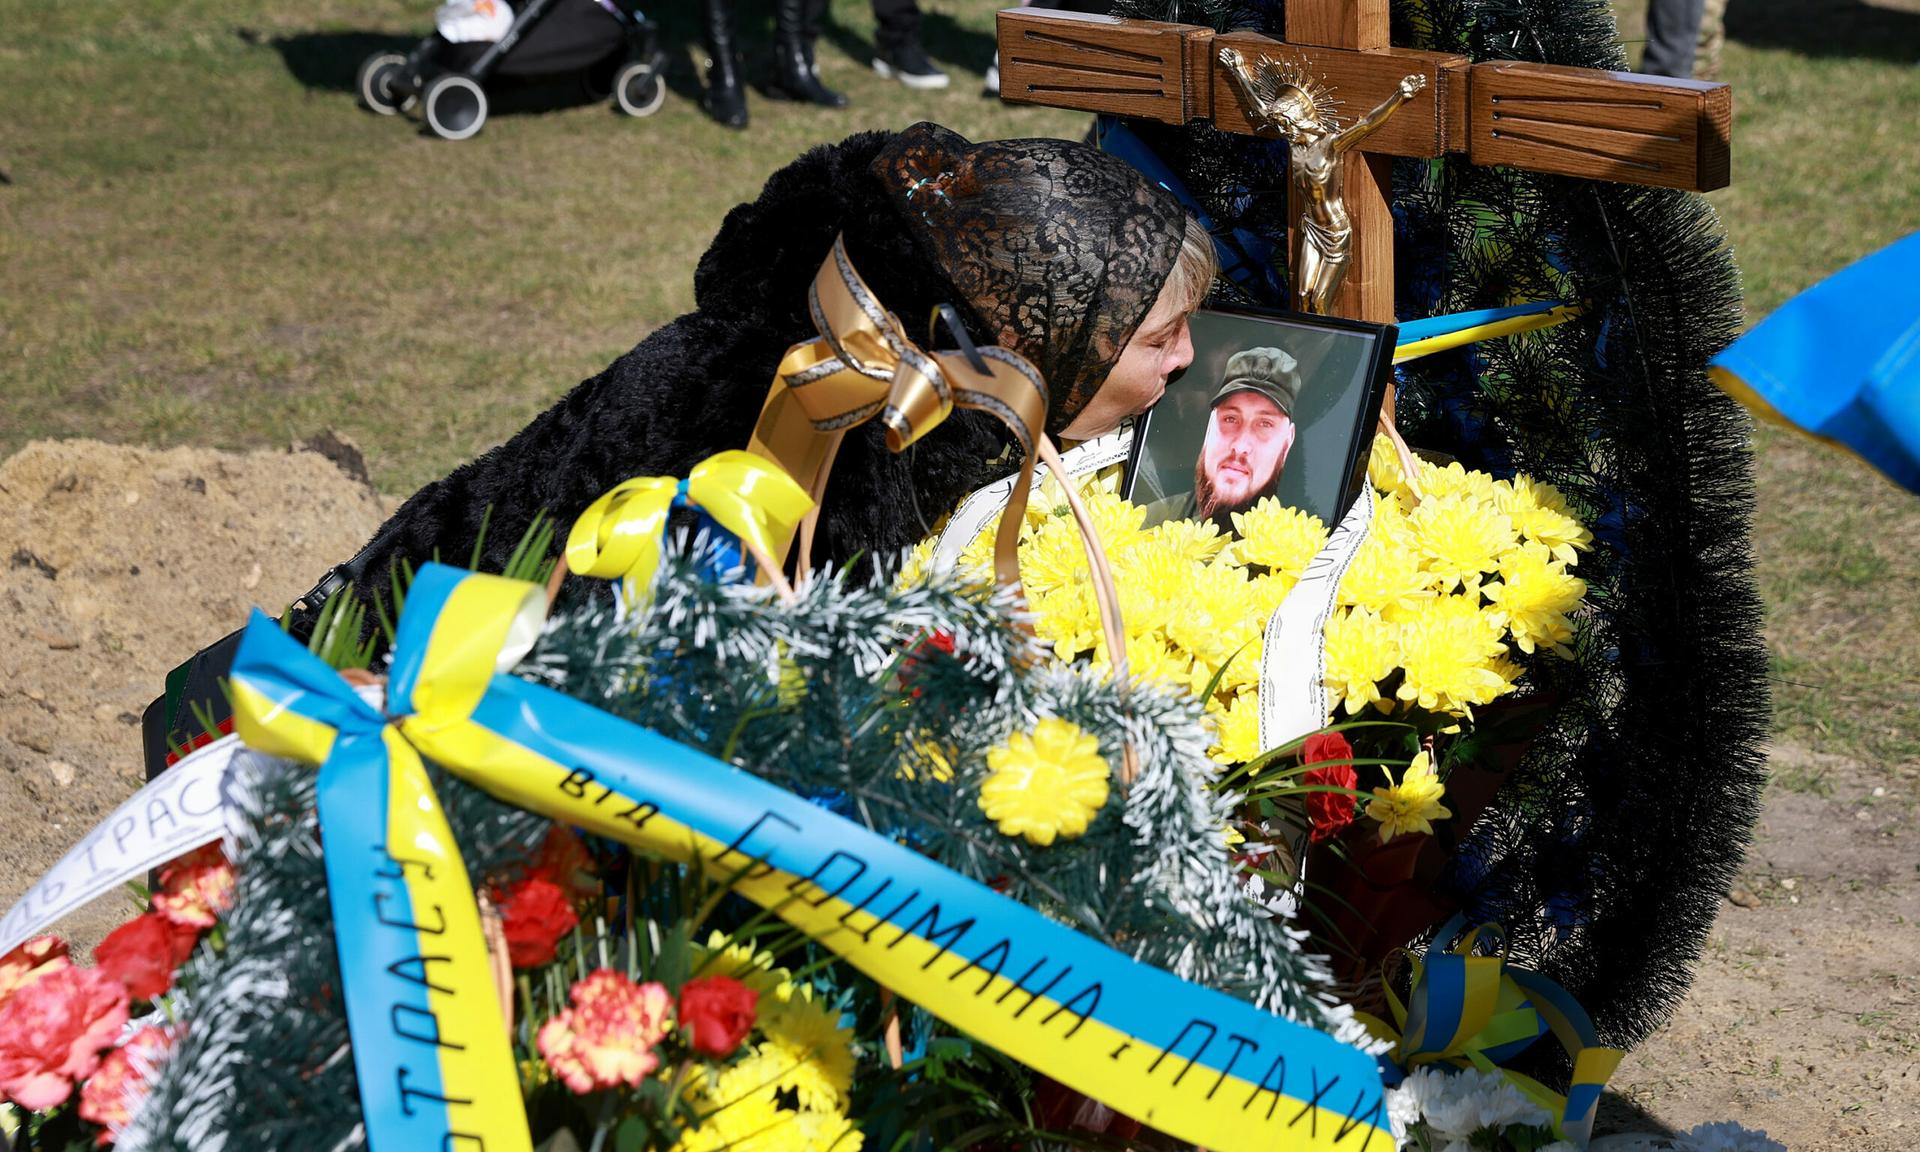 Olena Siksoy kisses a picture of her son  and Ukrainian soldier Ruslan Siksoy during his burial at the Lychakiv Cemetery on April 17, 2022, in Lviv, Ukraine. (Photo by Joe Raedle/Getty Images)